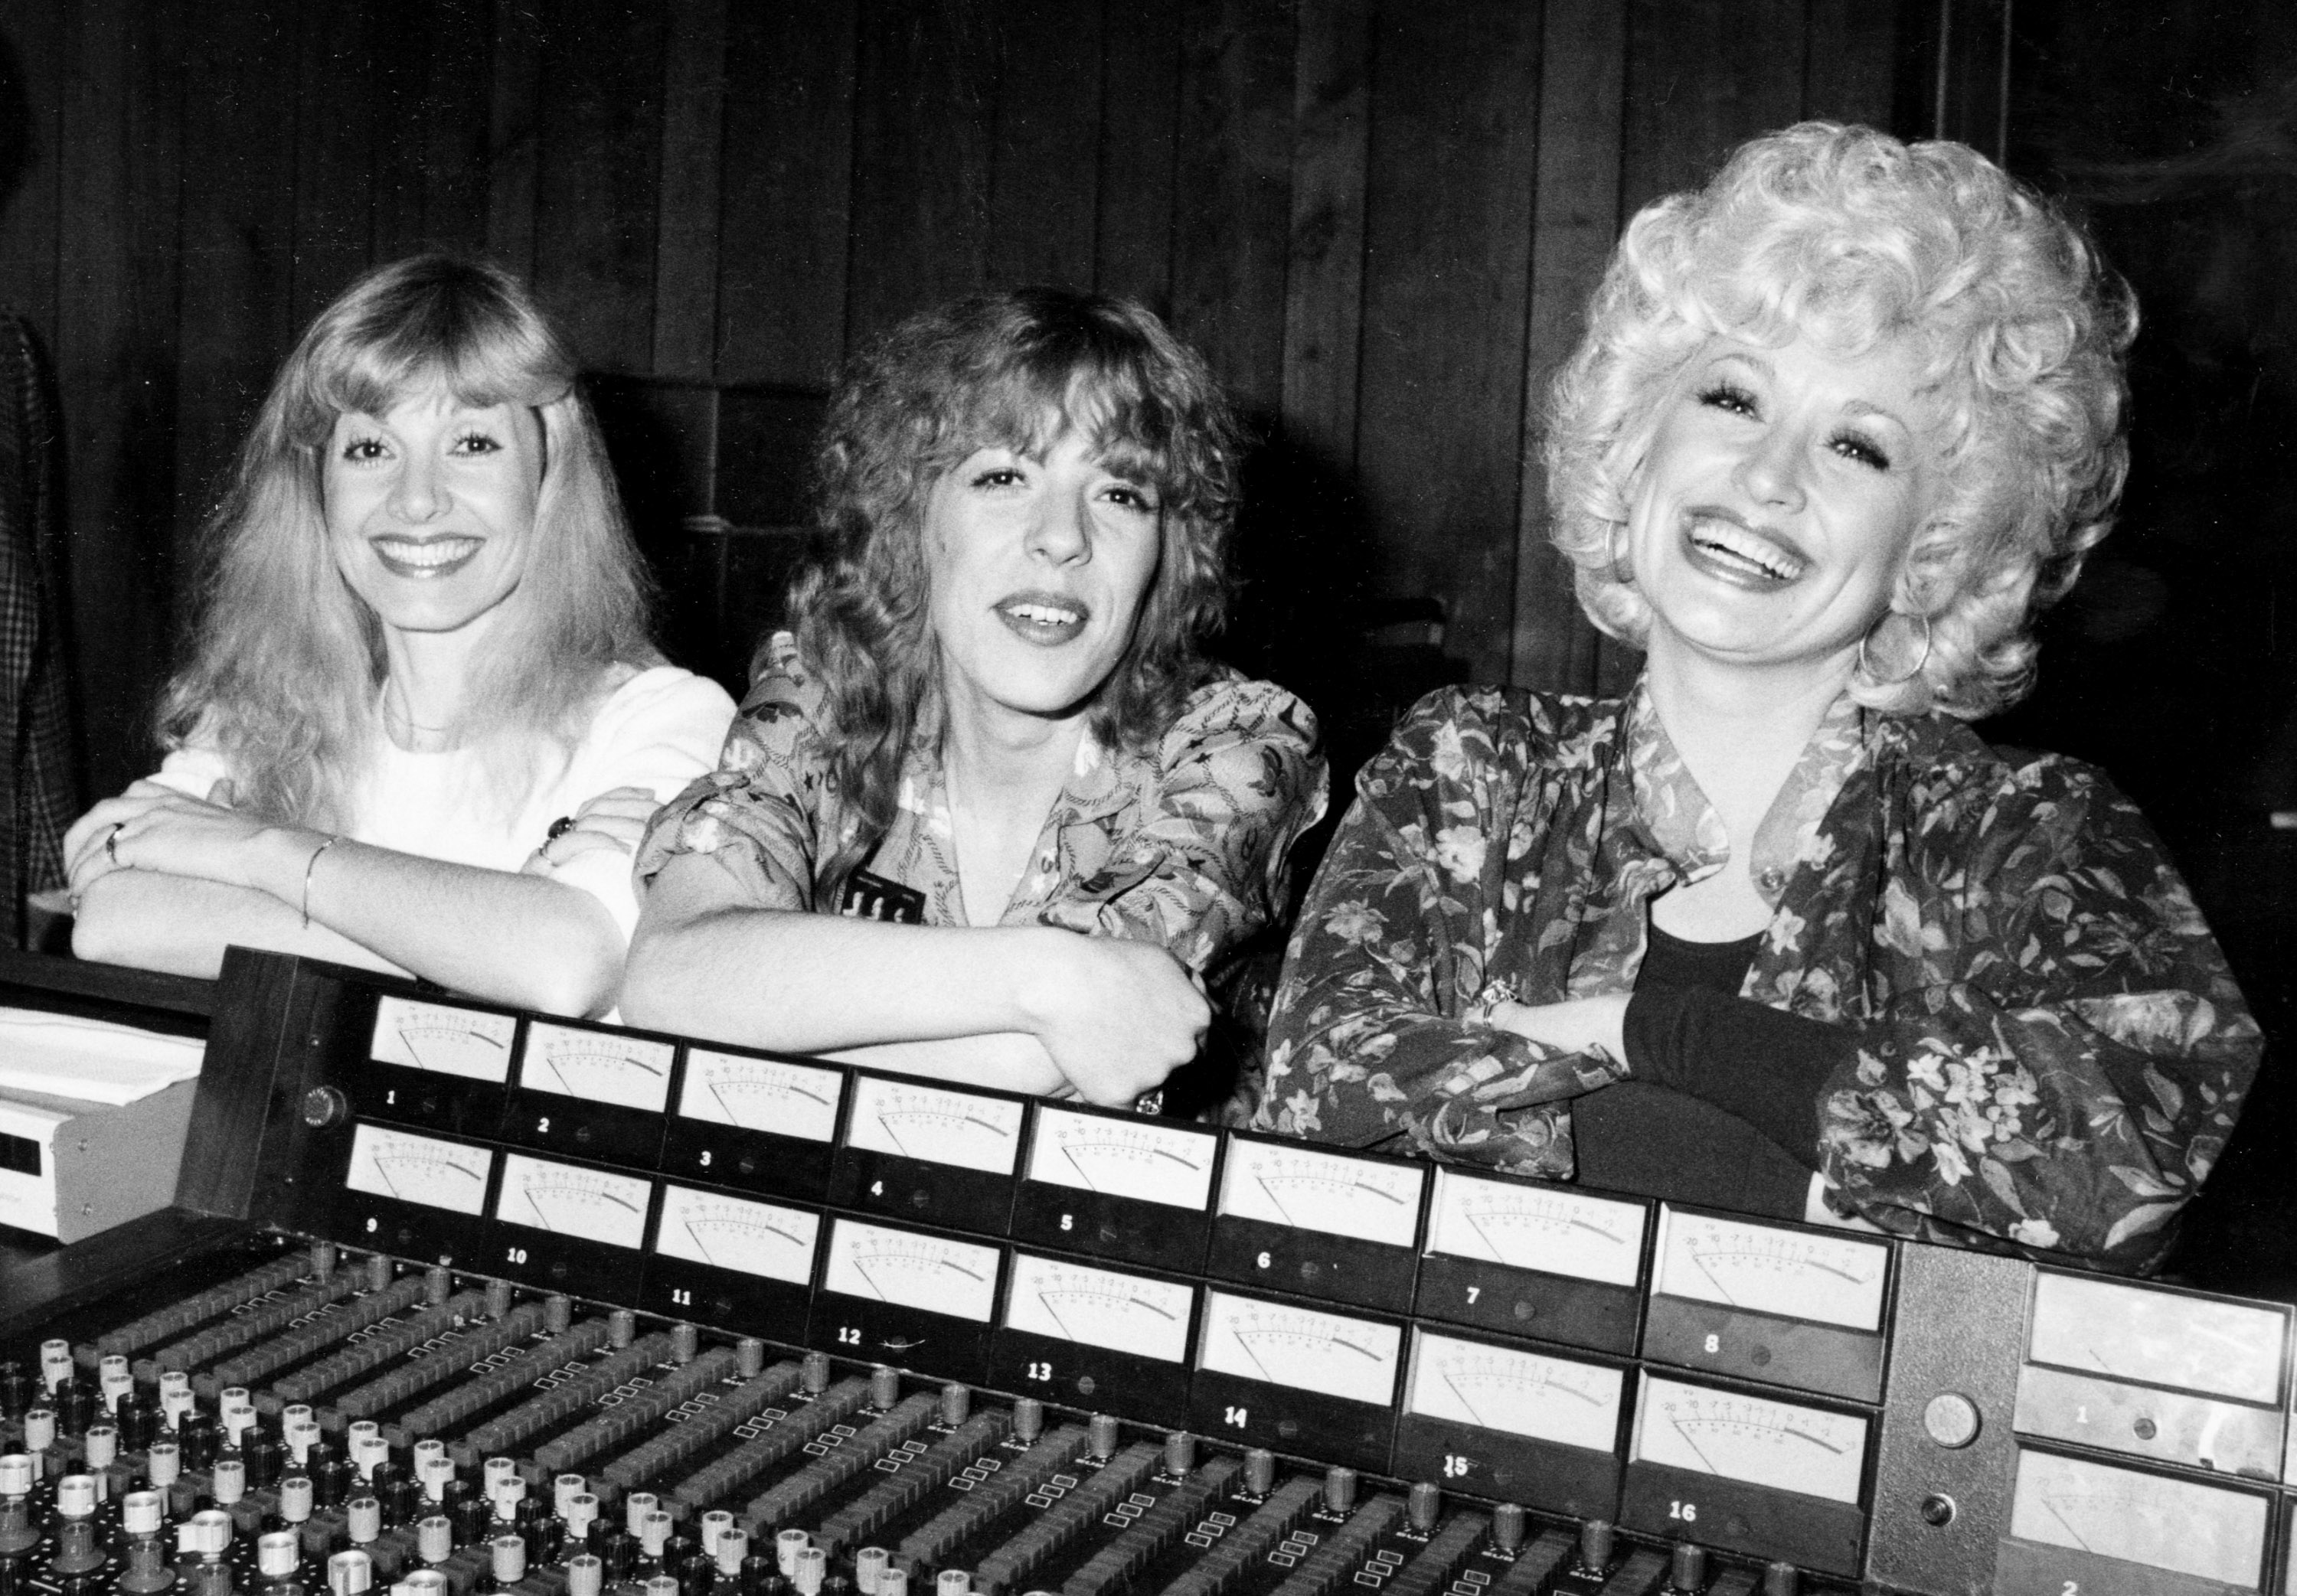 A black and white photo of Dolly Parton and her siblings Stella and Frieda Parton. They stand in front of recording equipment.